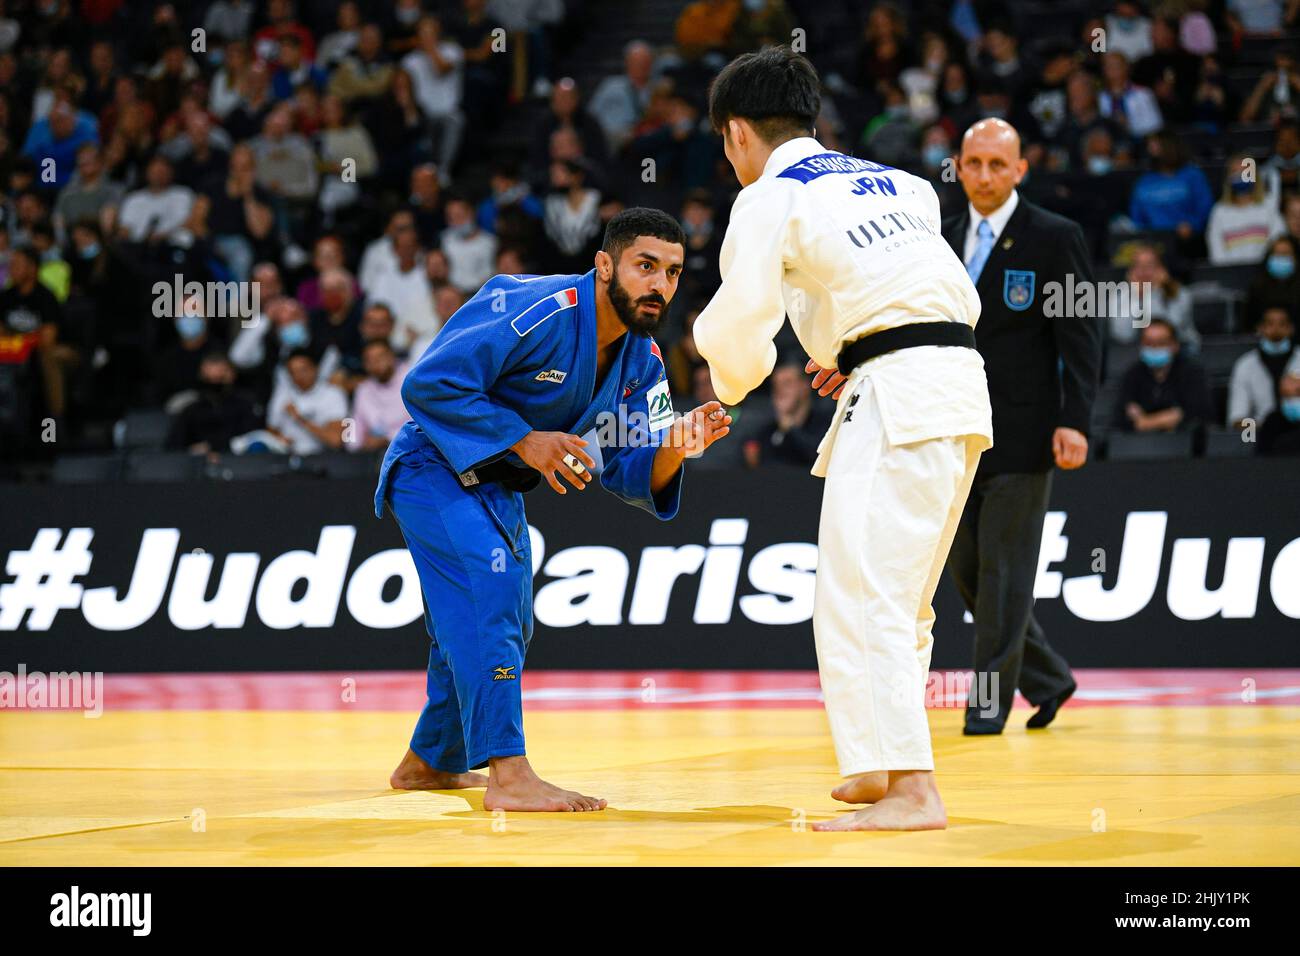 Men -66 kg, Walide KHYAR (blue) of France Bronze medal competes during the Paris Grand Slam 2021, Judo event on October 16, 2021 at AccorHotels Arena Stock Photo